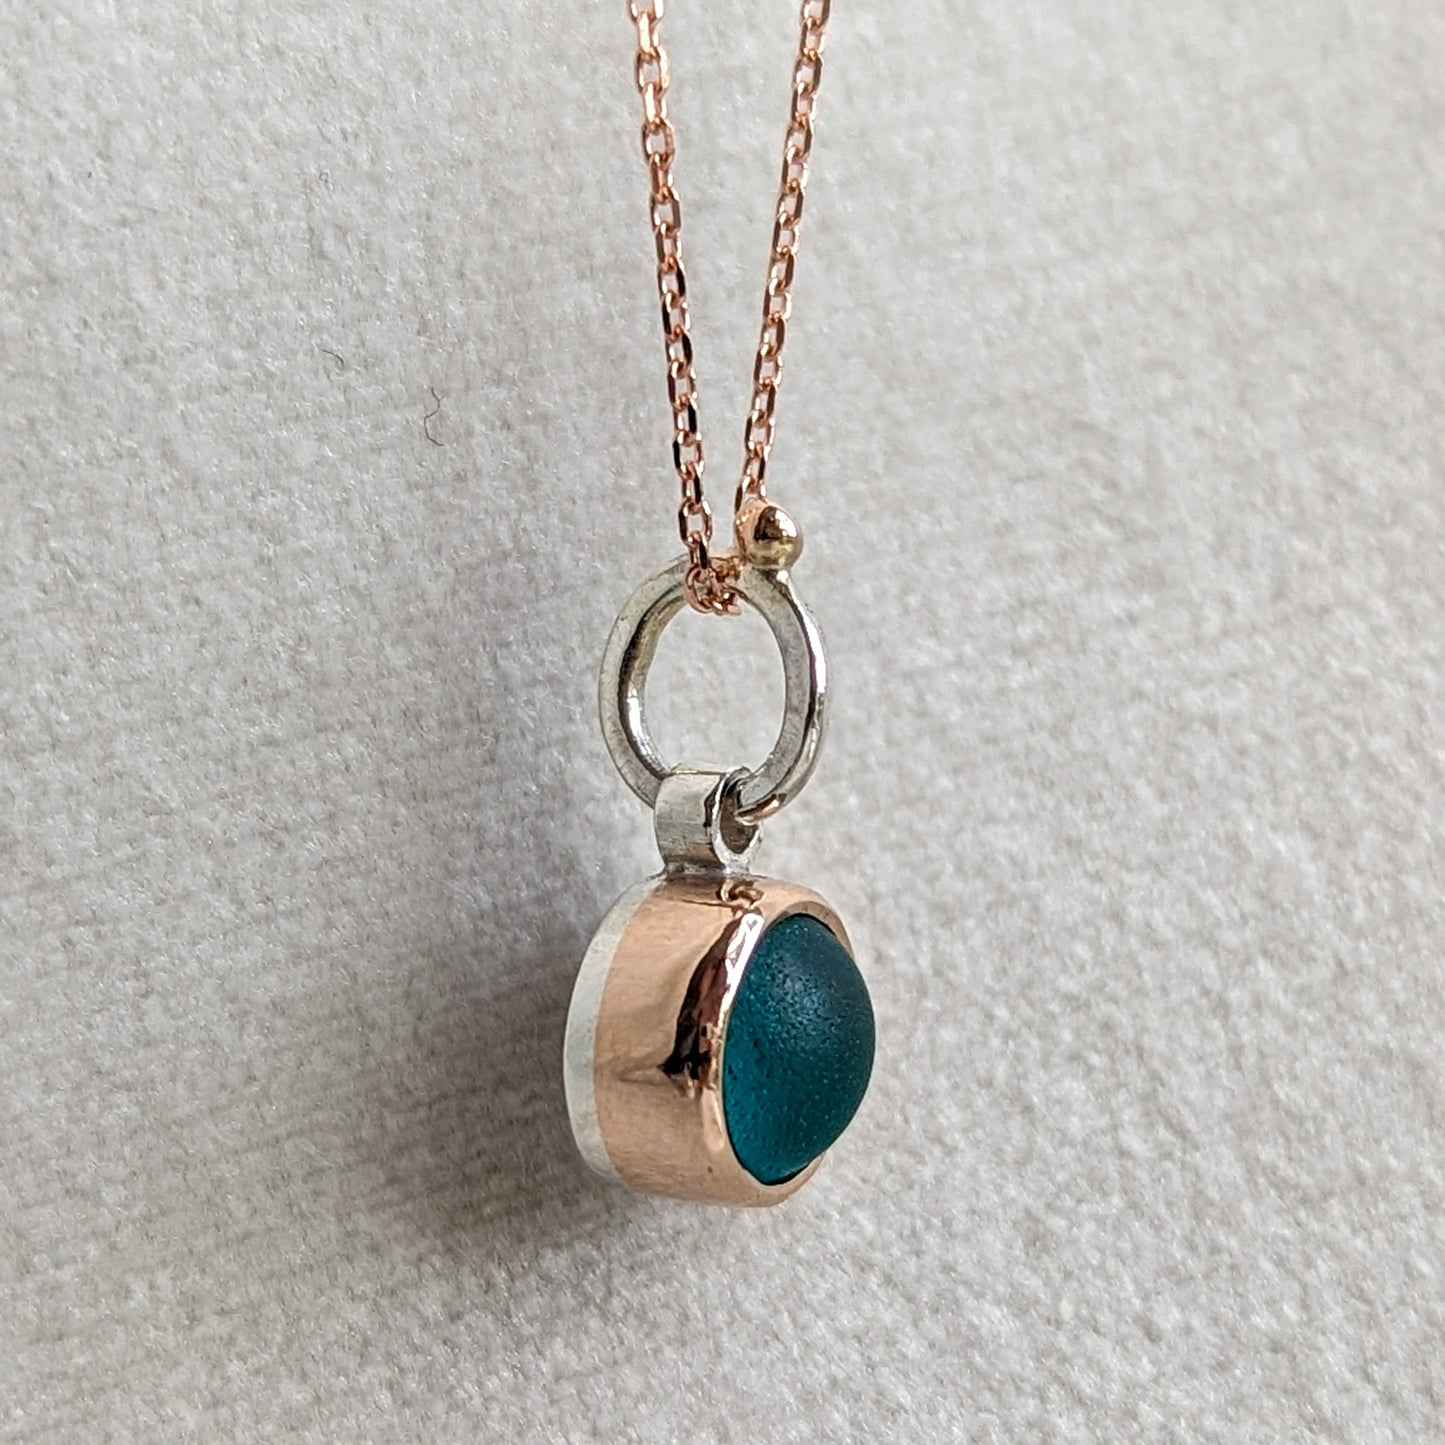 Rose gold necklace with round teal sea glass by Booblinka Jewellery